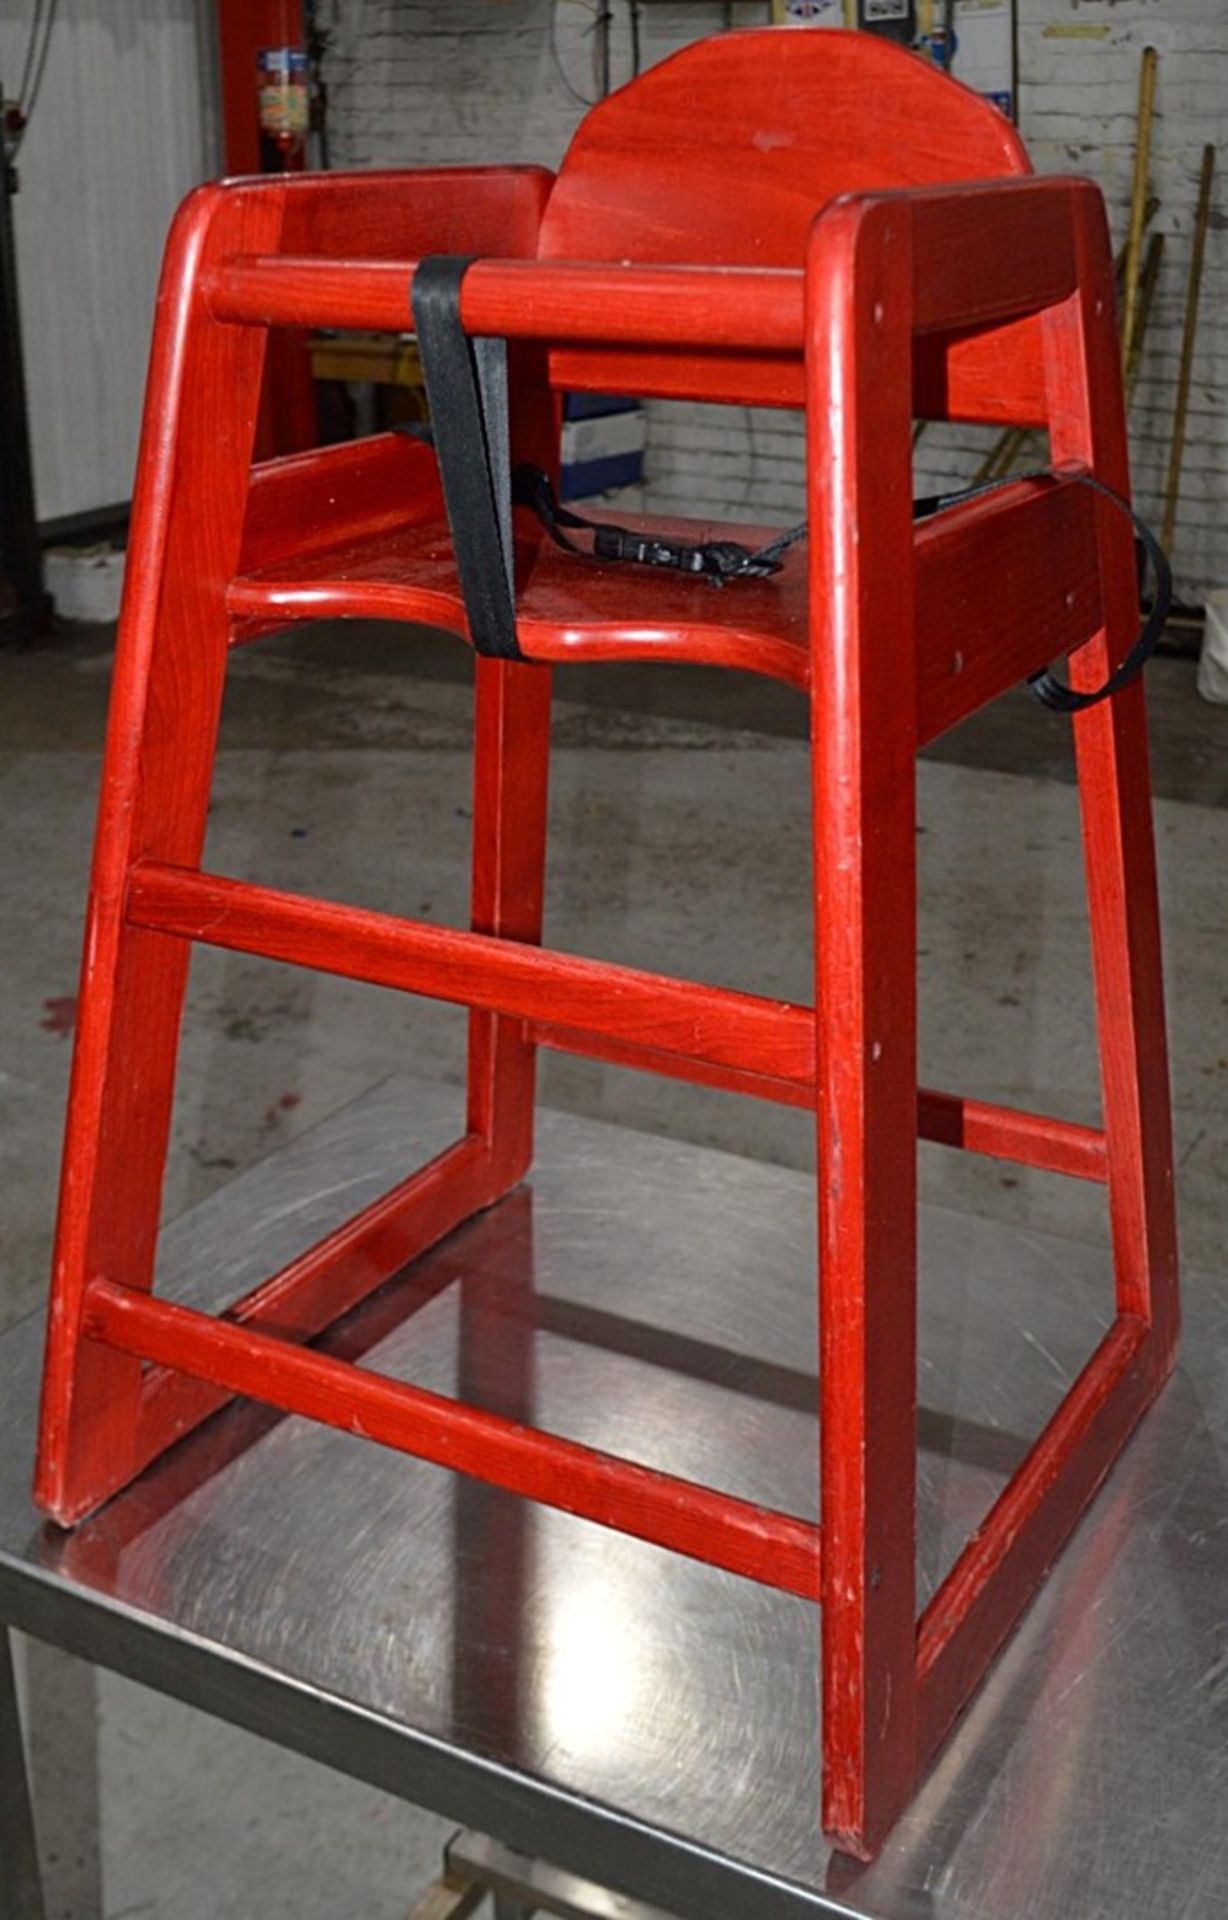 4 x FAMEG Baby High Chairs In Red - Dimensions: Width 48 x Depth 48 x Back Height 75cm, Seat 50cm - Image 5 of 8